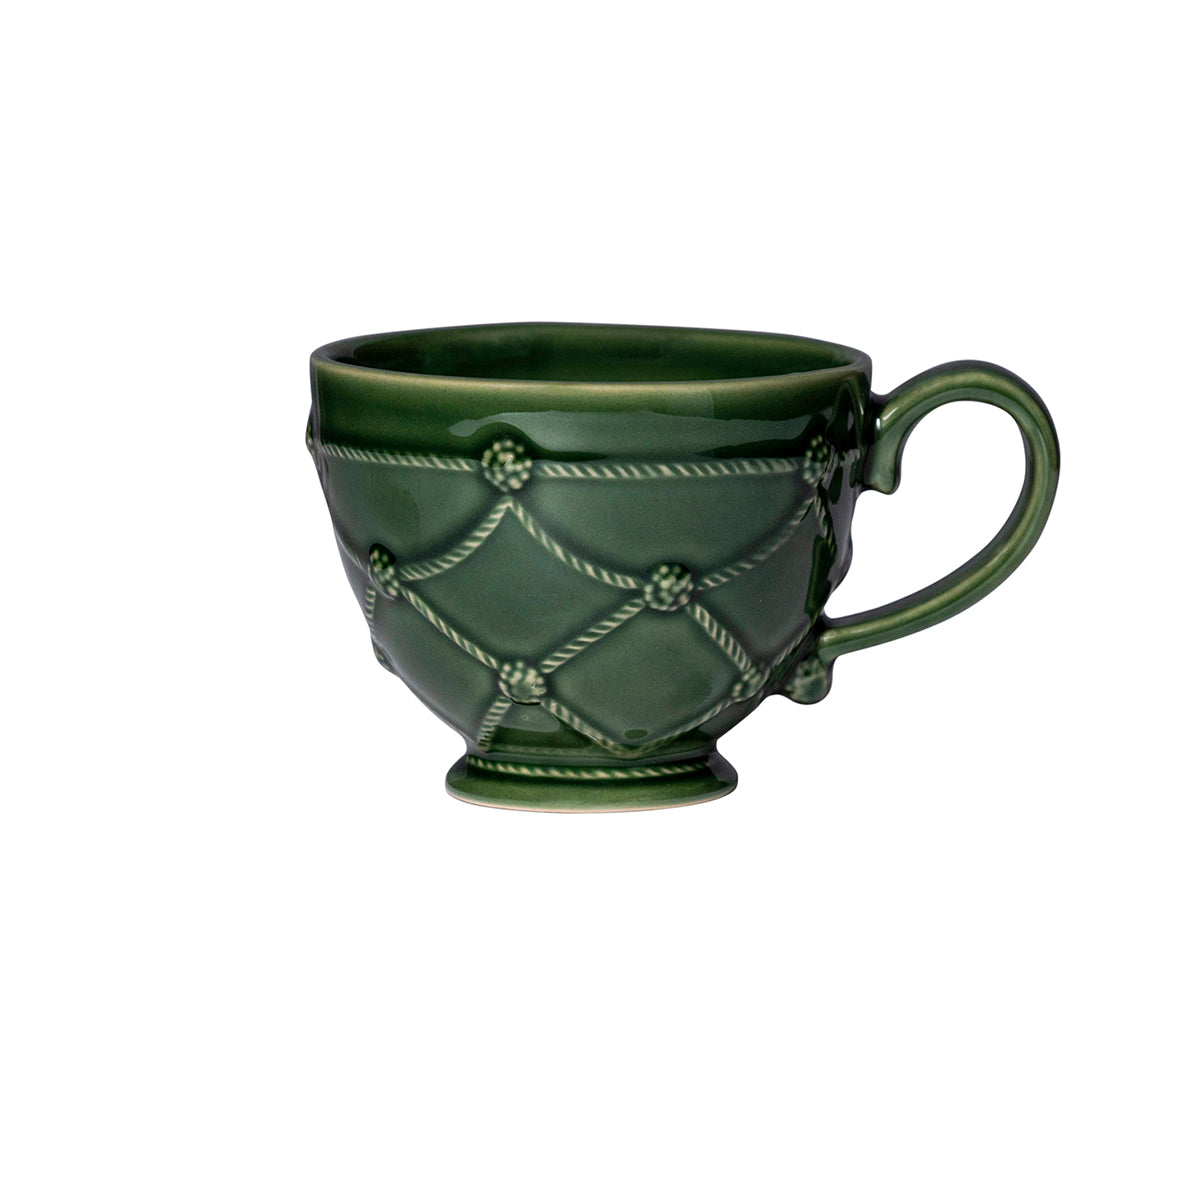 Featuring motifs inspired by those found at the heart of lush European gardens, this regal footed mug dresses up your morning coffee with a little splash of splendor